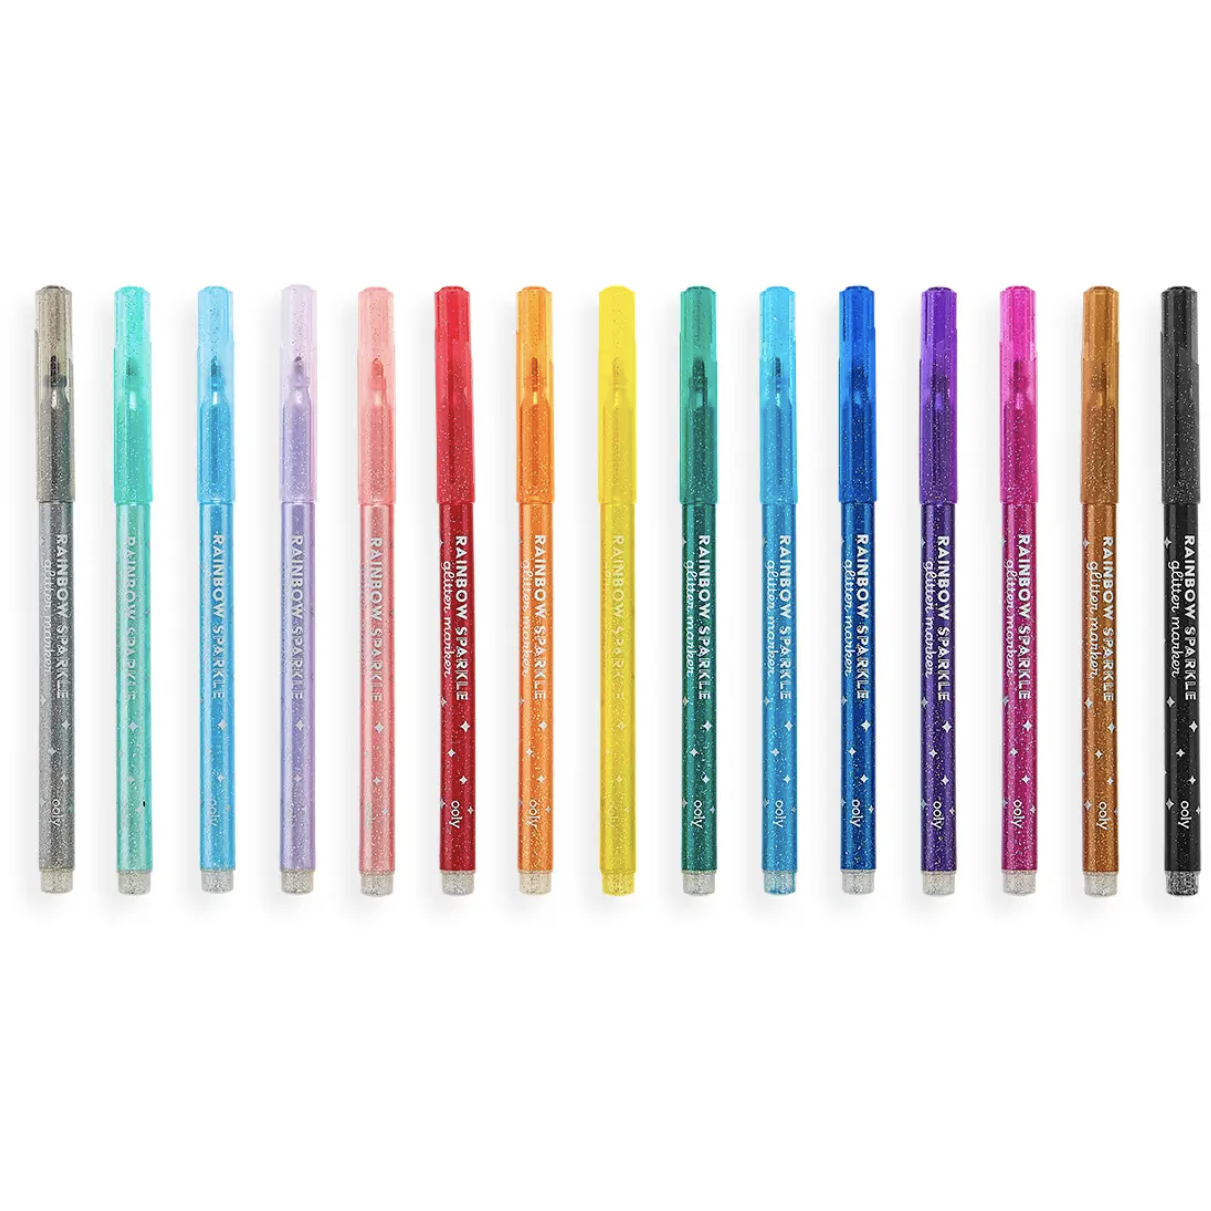 Rainbow Sparkle Glitter Markers - Set of 15 by Ooly